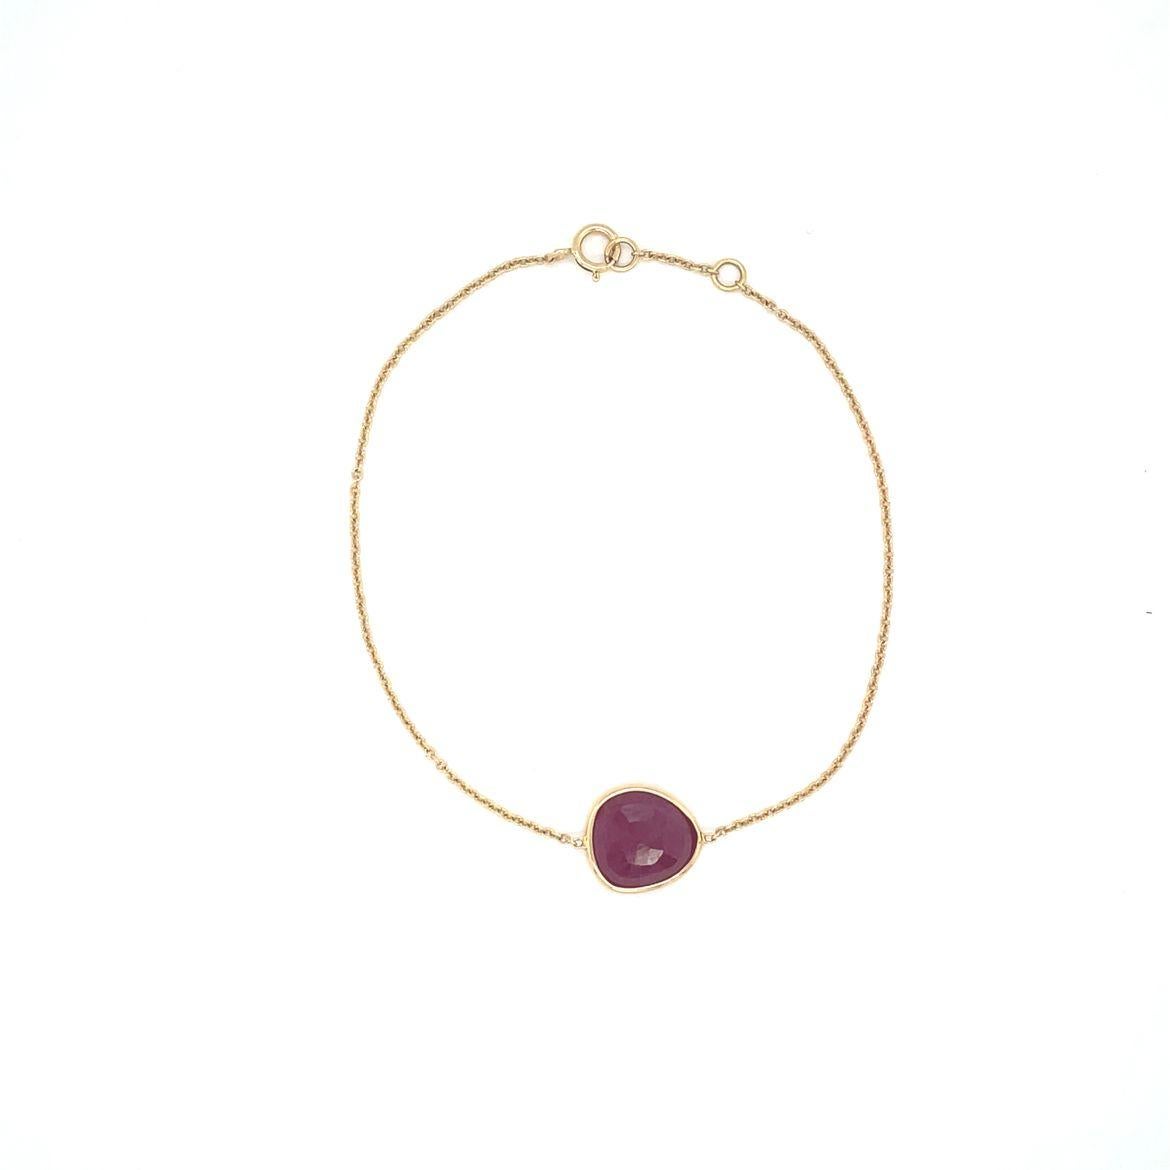 This lovely bracelet is handcrafted in 18K gold and features rose-cut irregular oval shaped single drop ruby. The Ruby is natural, weighting approx 0.76 carats, wrapped in 18K yellow gold, and floating at the center of the chain. Designed and